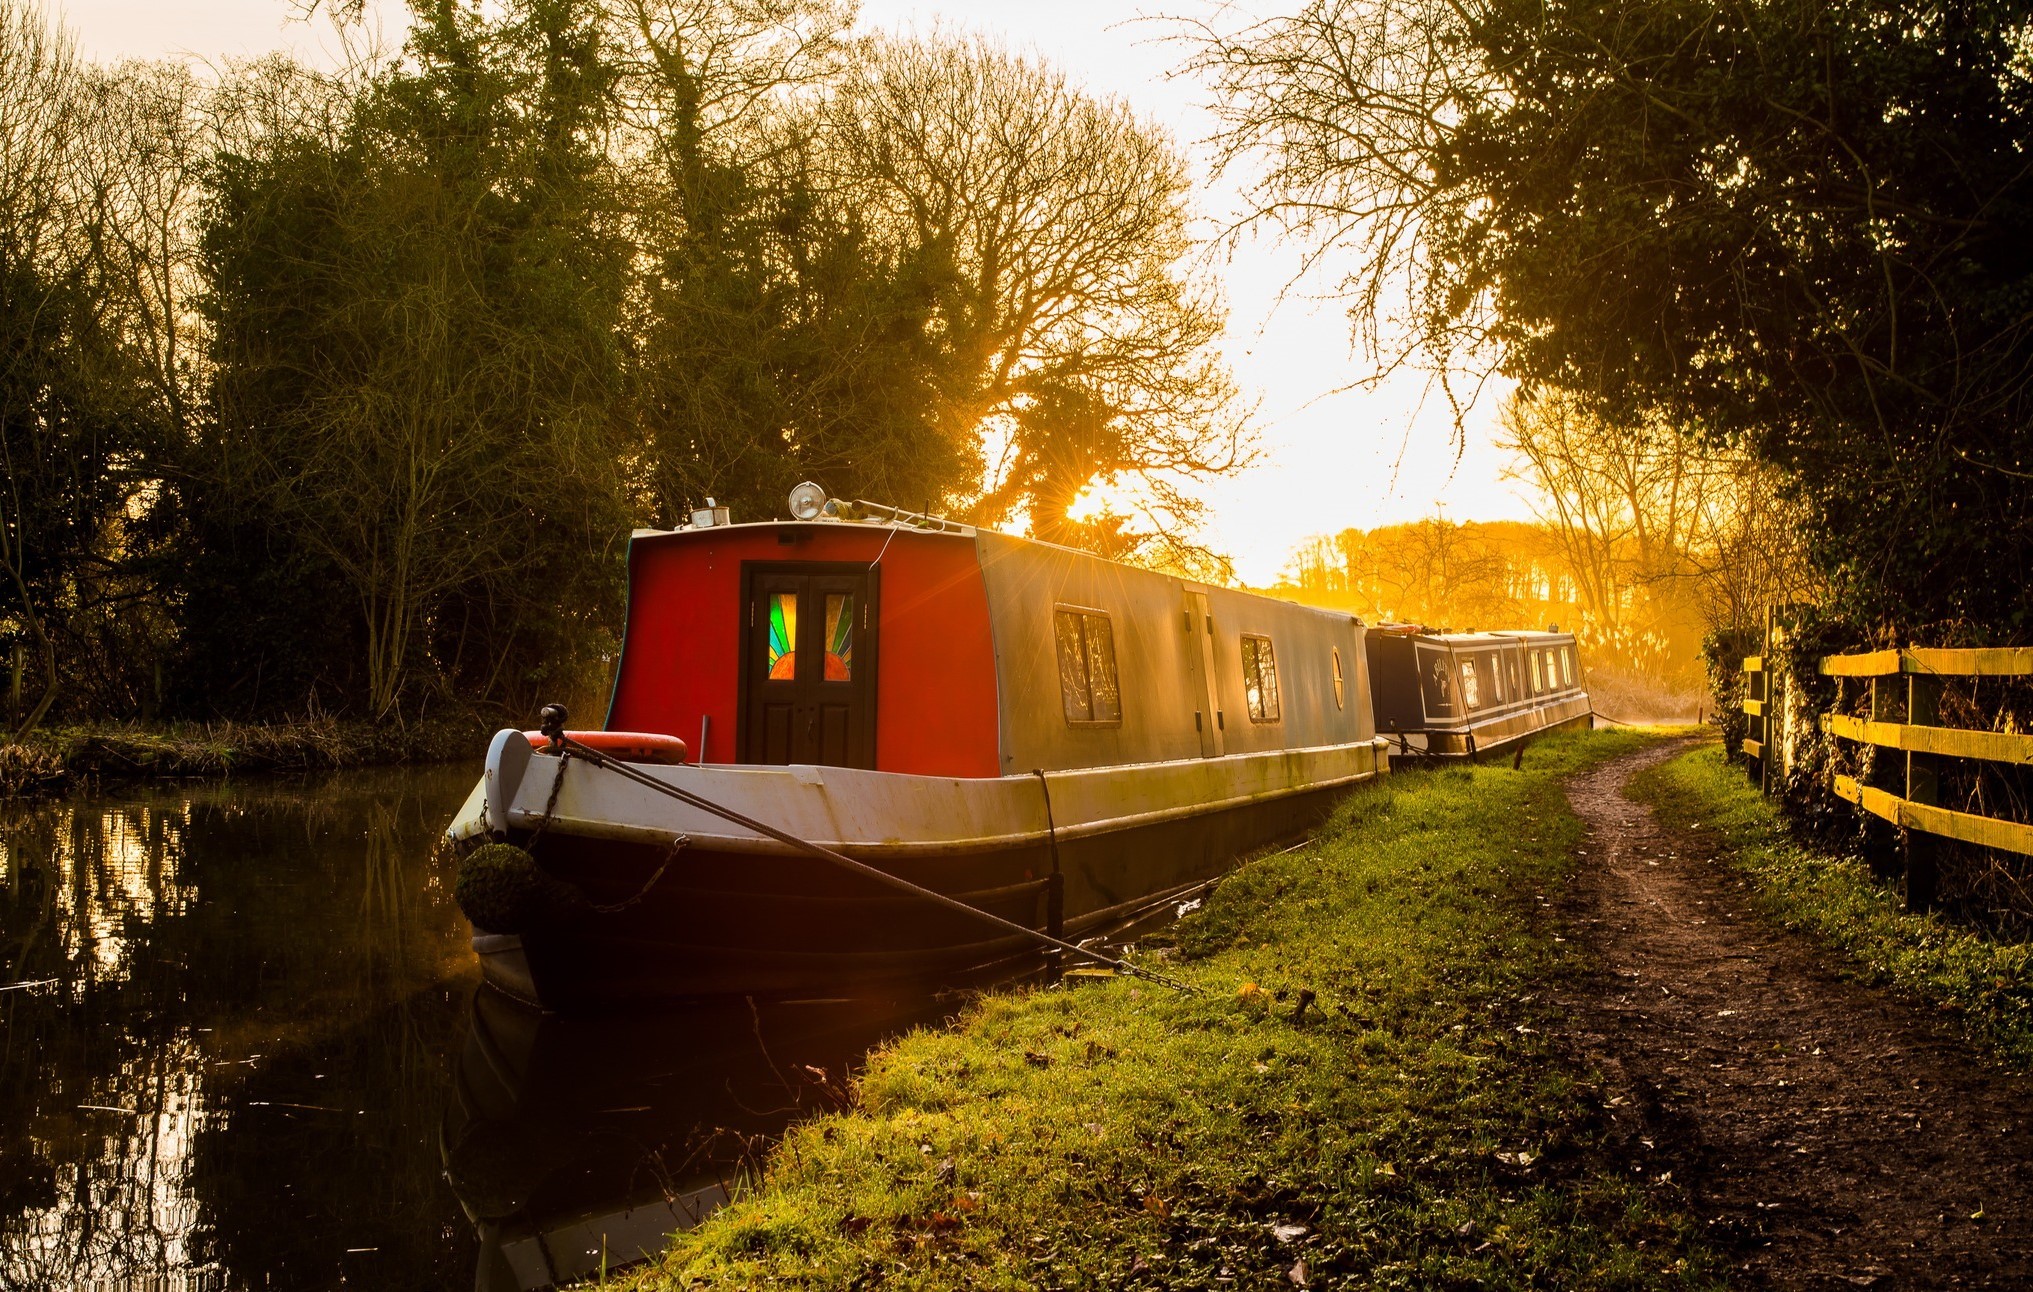 Sunrise at the canal at Little Leigh